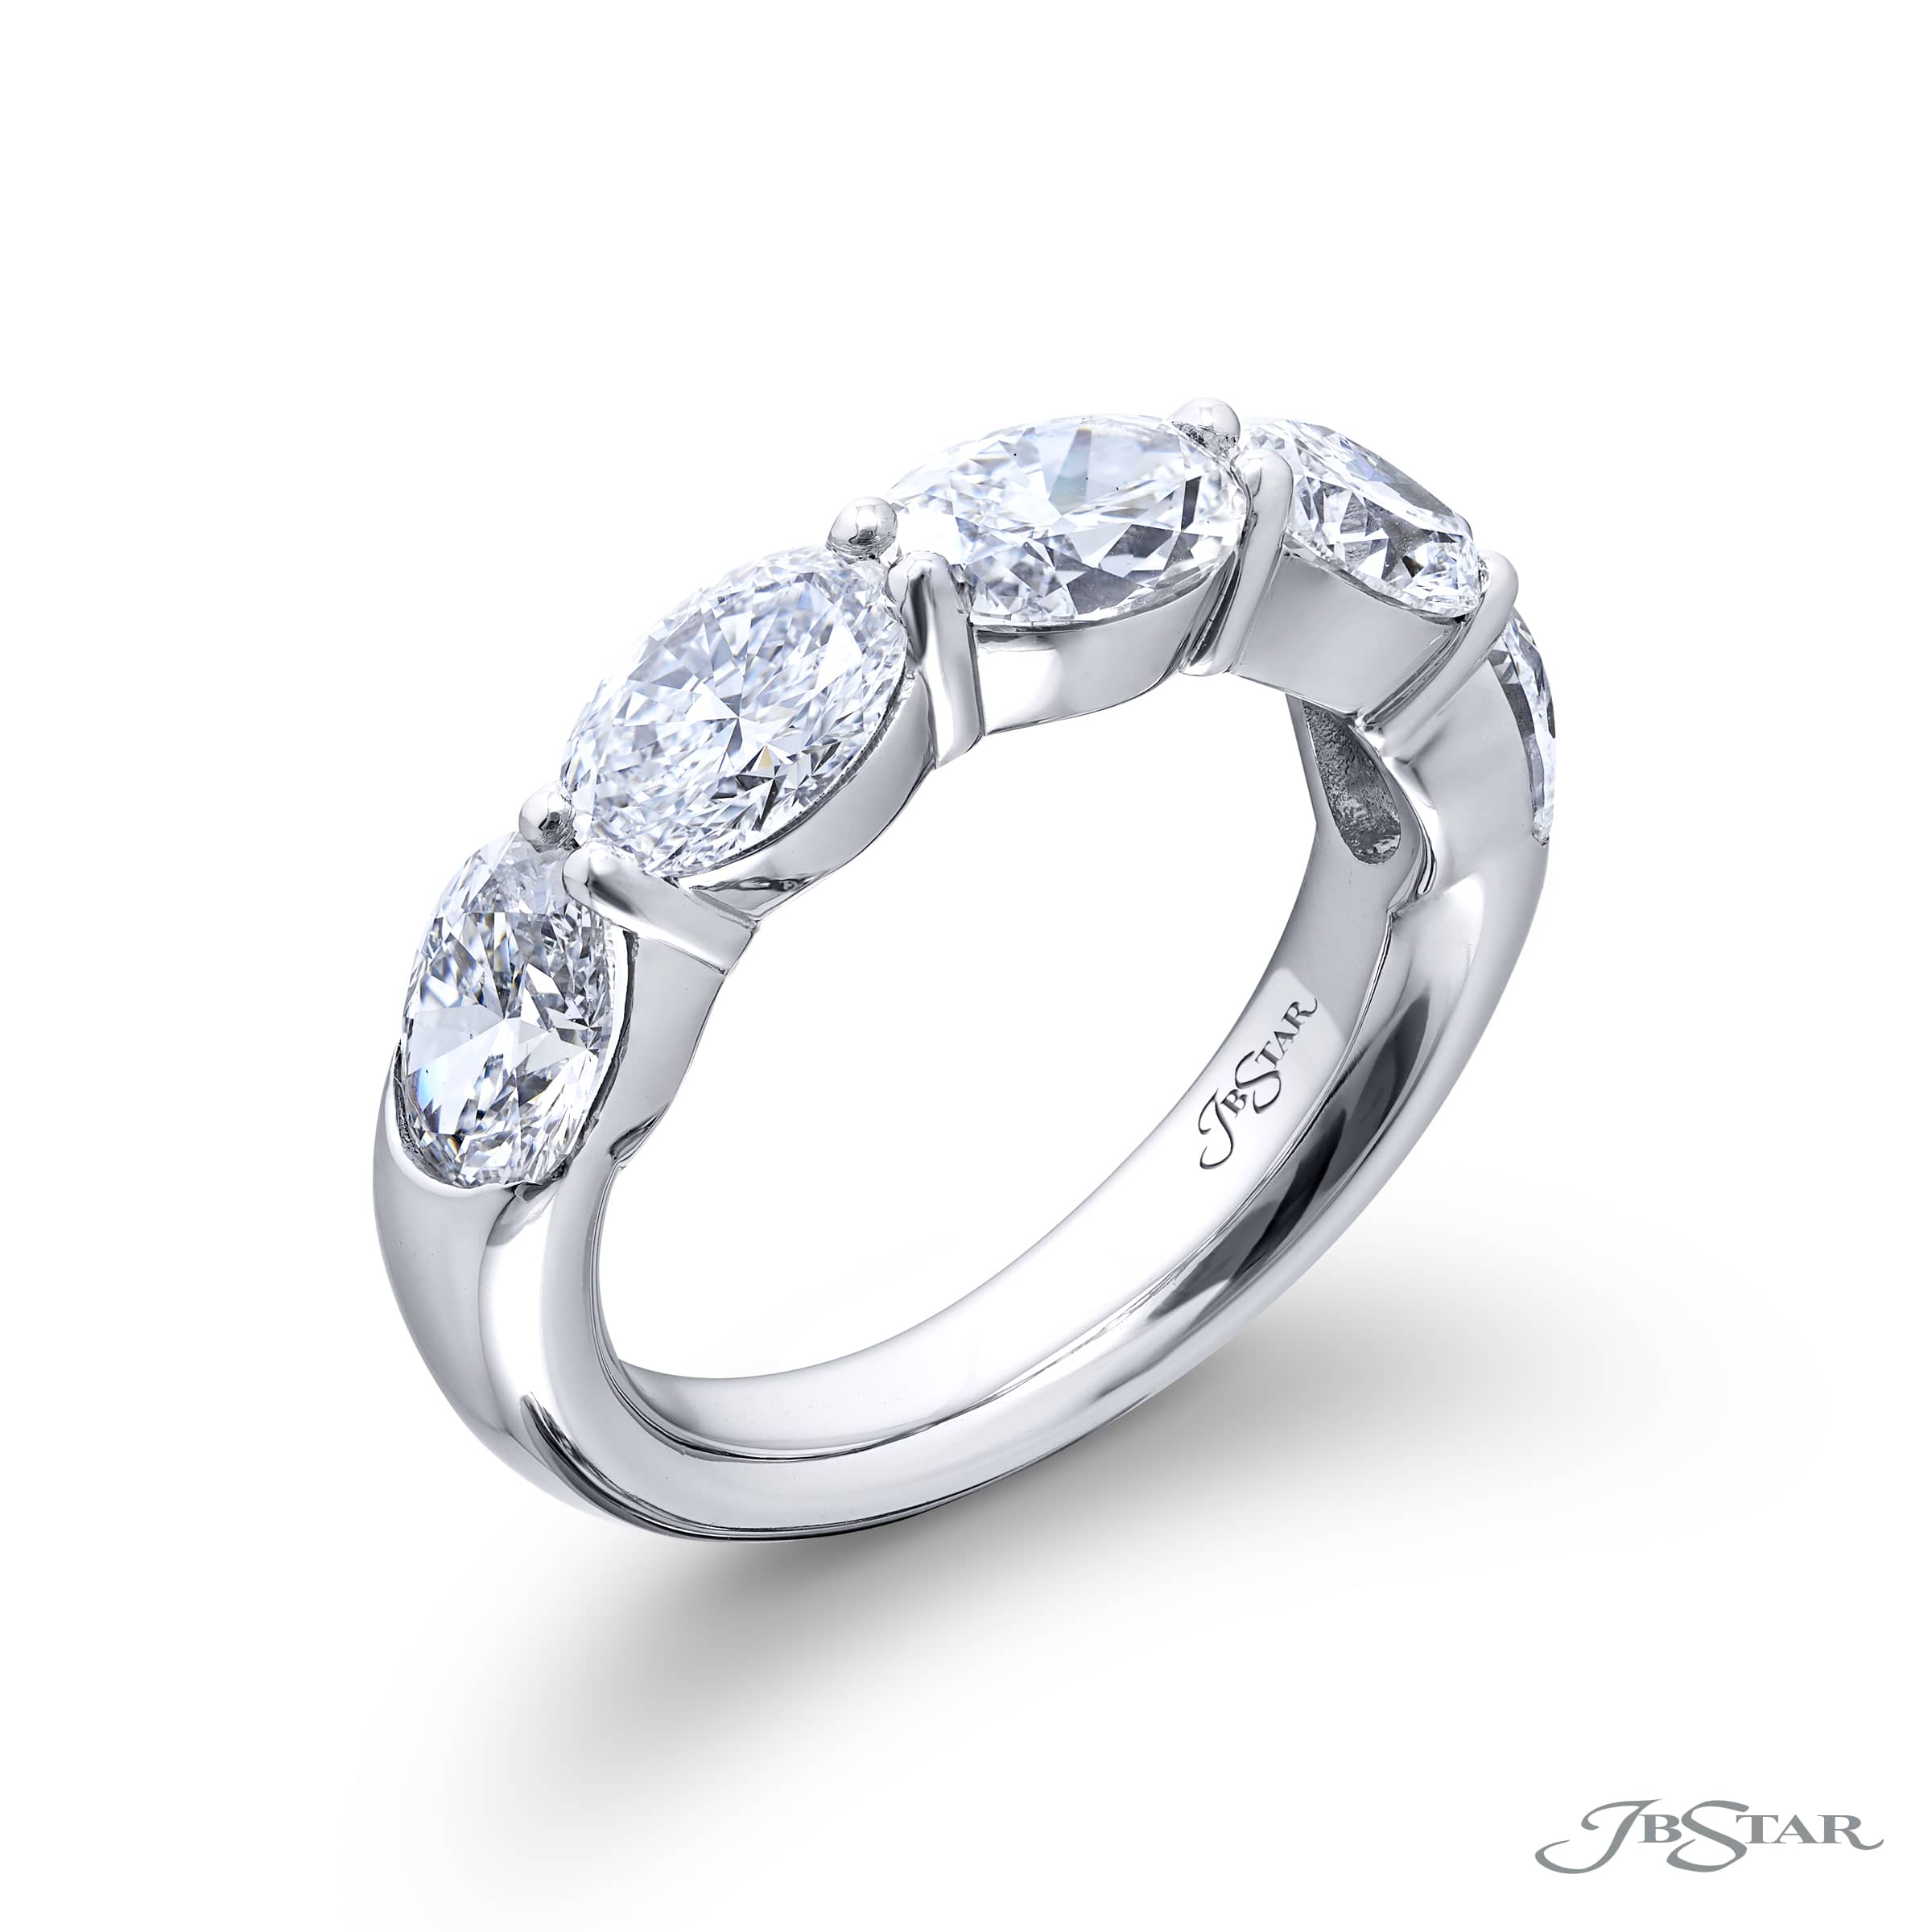 PLATINUM EAST TO WEST 5-STONE OVAL DIAMOND RING